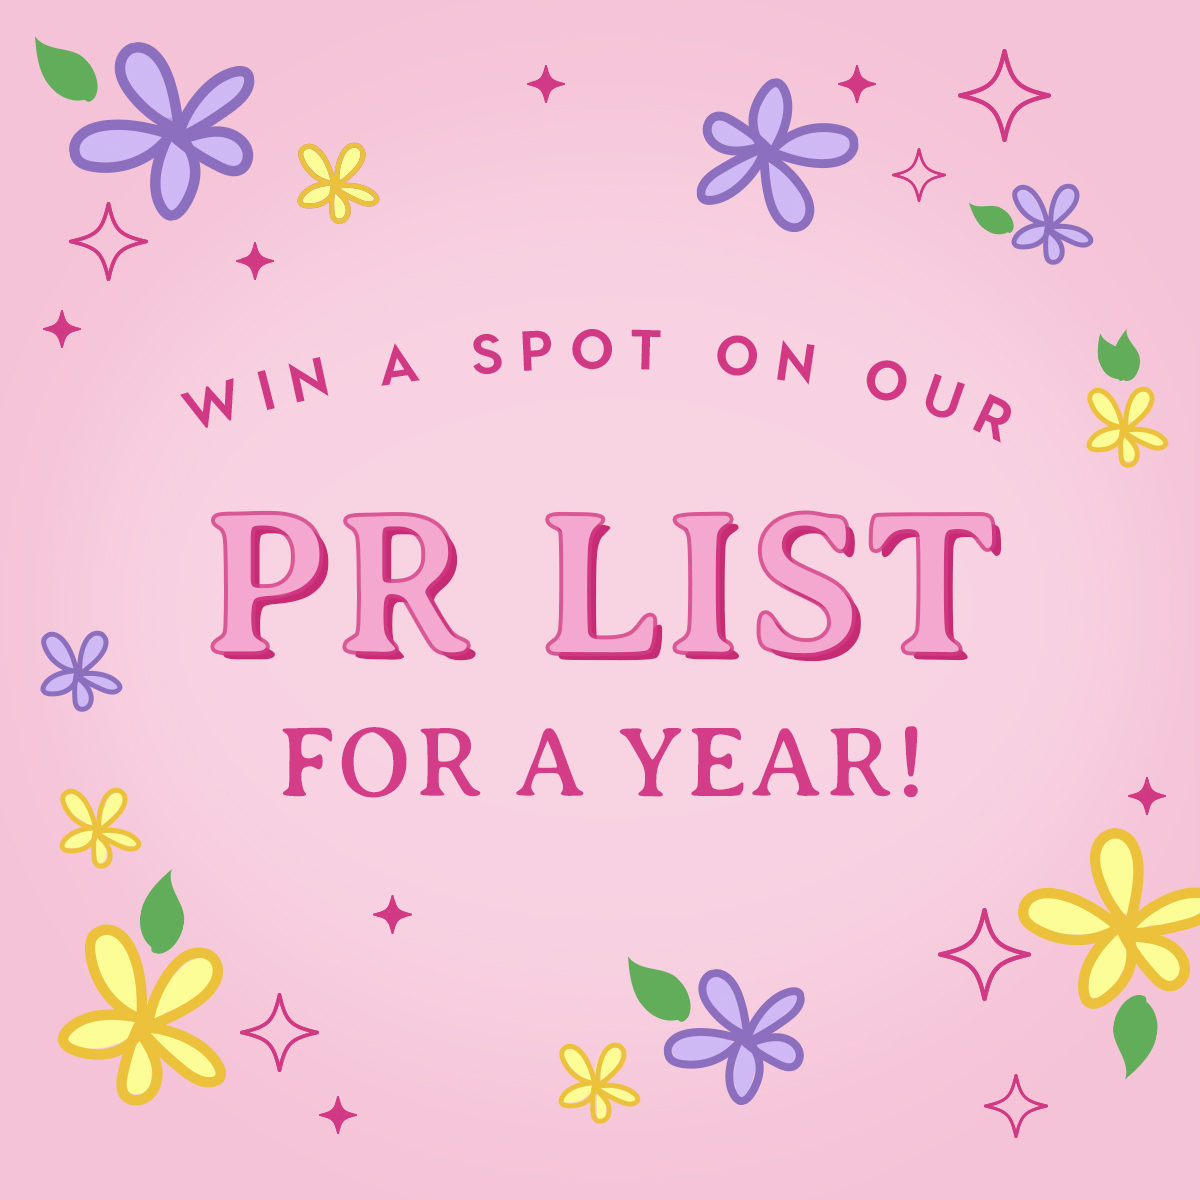 ColourPop Cosmetics on Twitter: "🌸📣INSTAGRAM #GIVEAWAY 📣🌸 Today, on Instagram, we're giving away 1 spot on our PR LIST for 1 WHOLE YEAR ‼️ Visit our IG for details on how